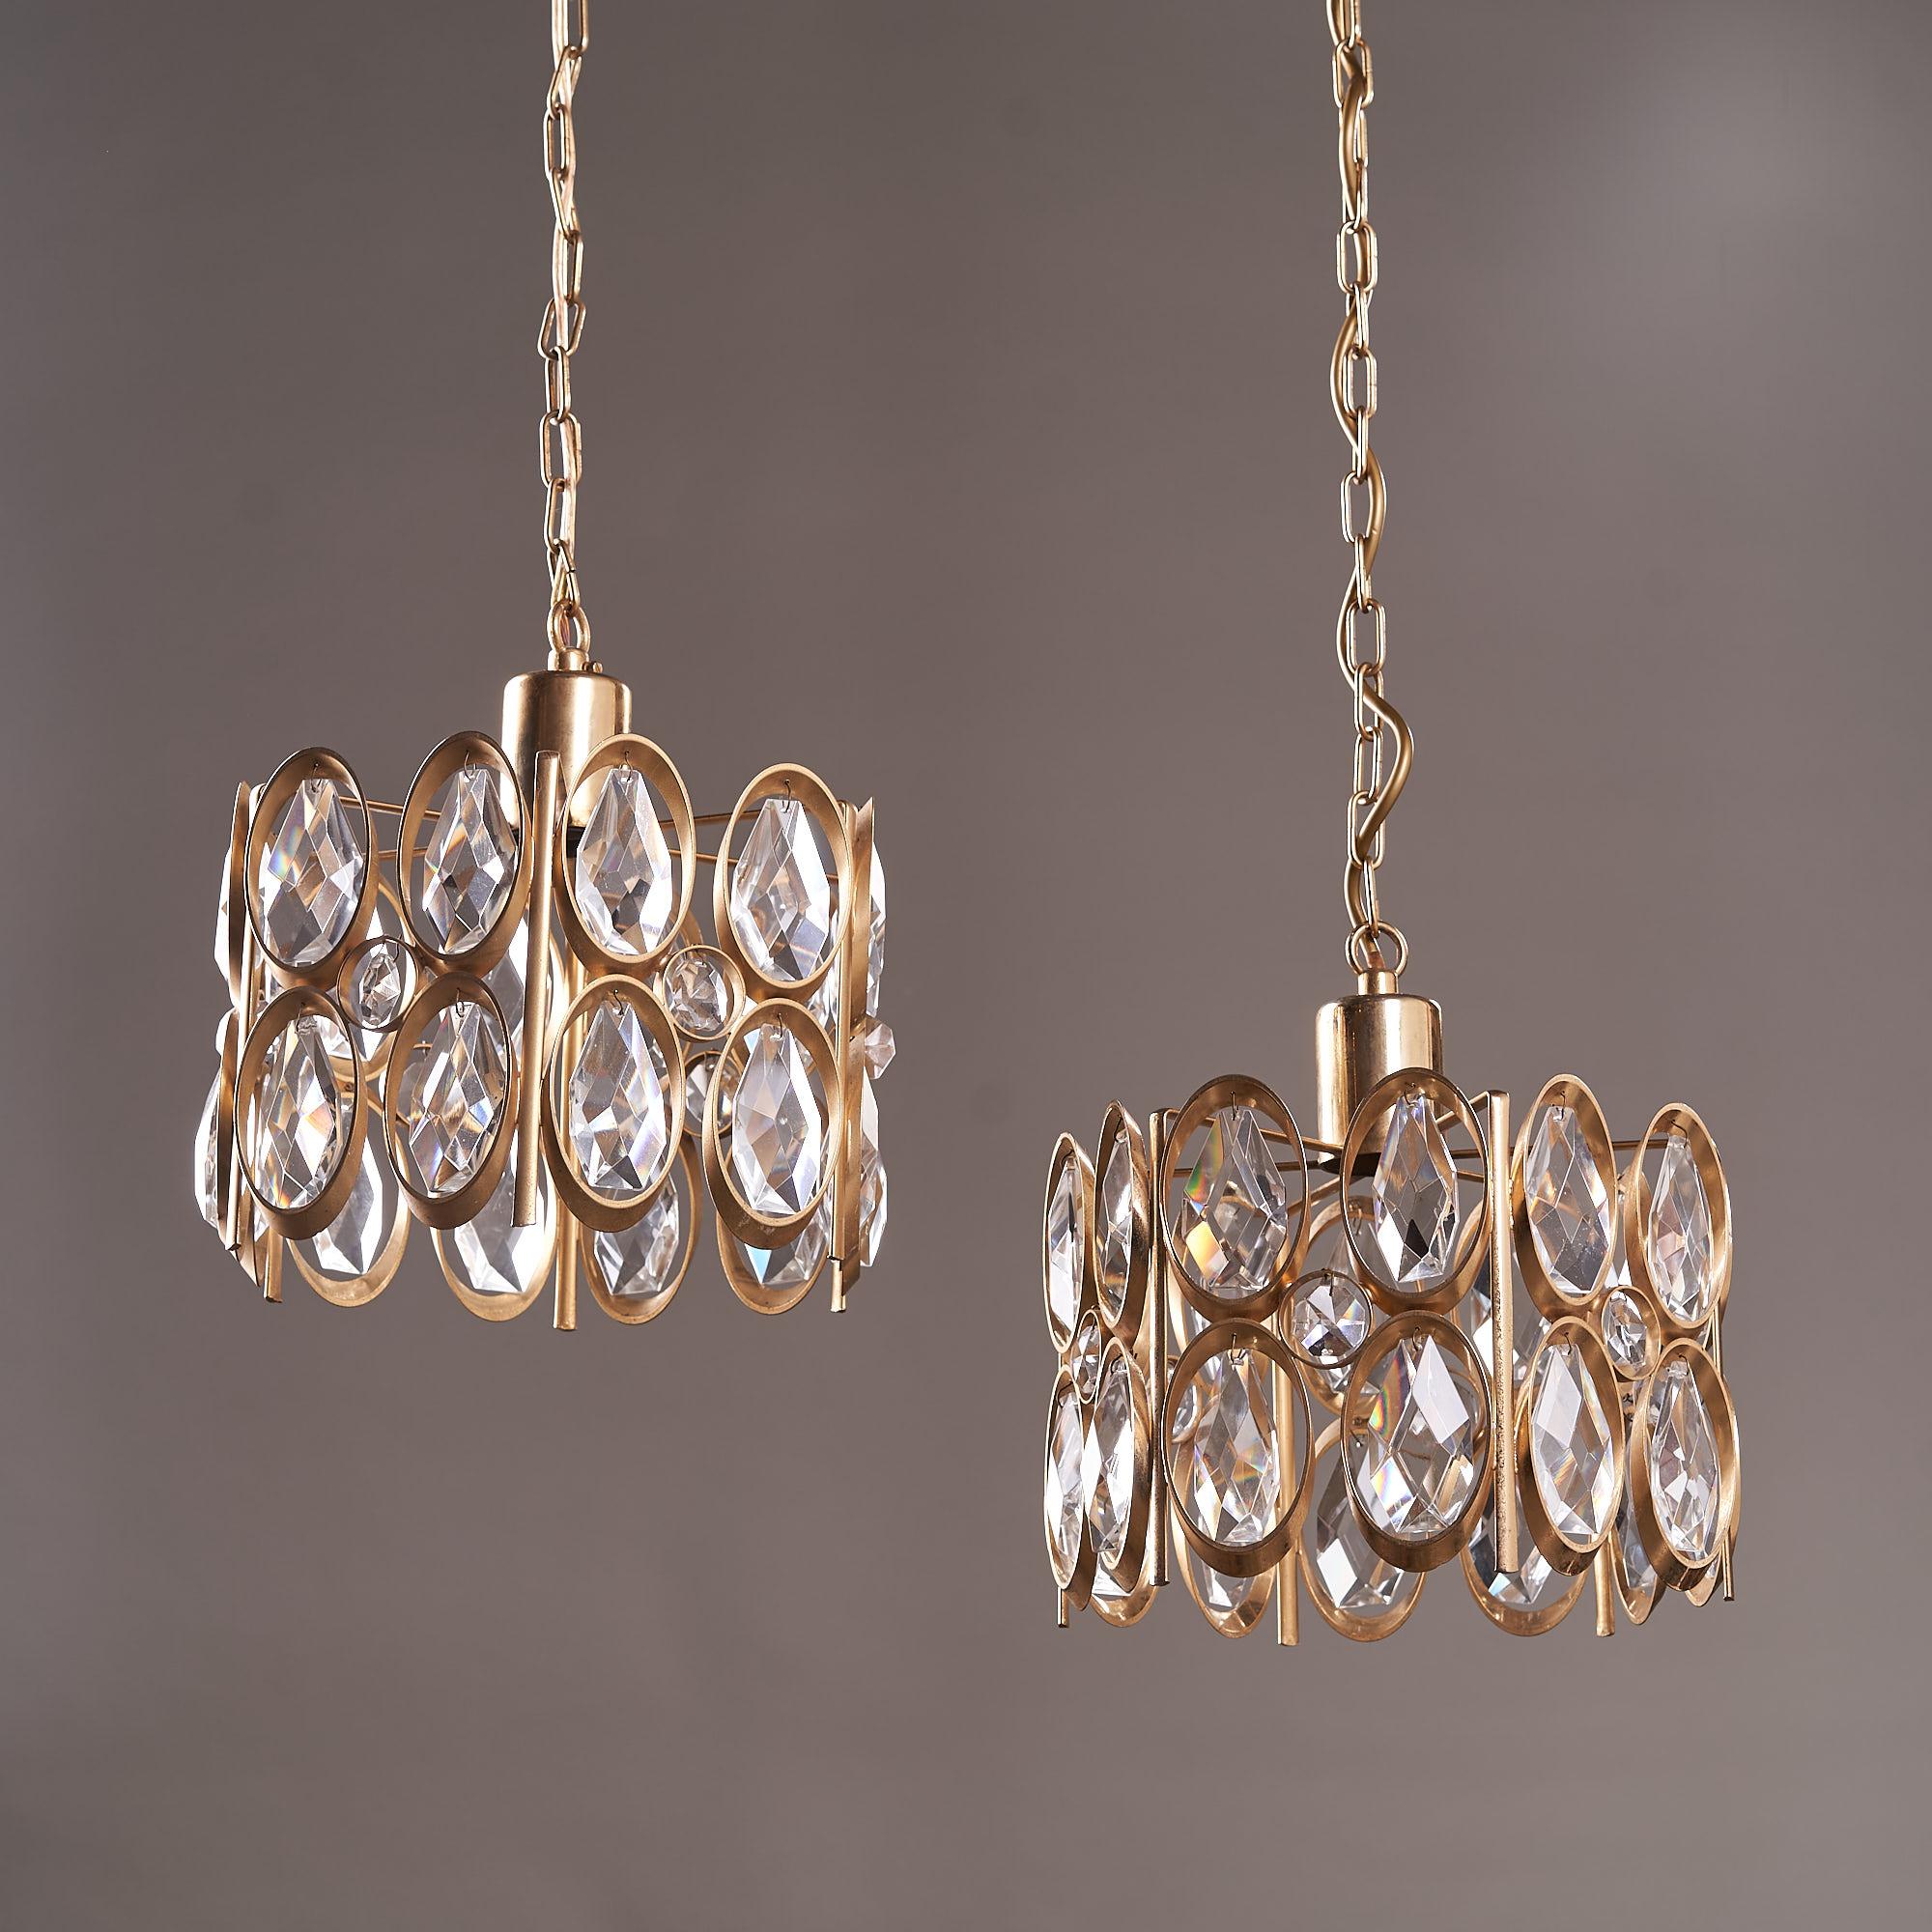 Hollywood Regency Pair of Gold-Plated Brass Framed Glass Chandeliers